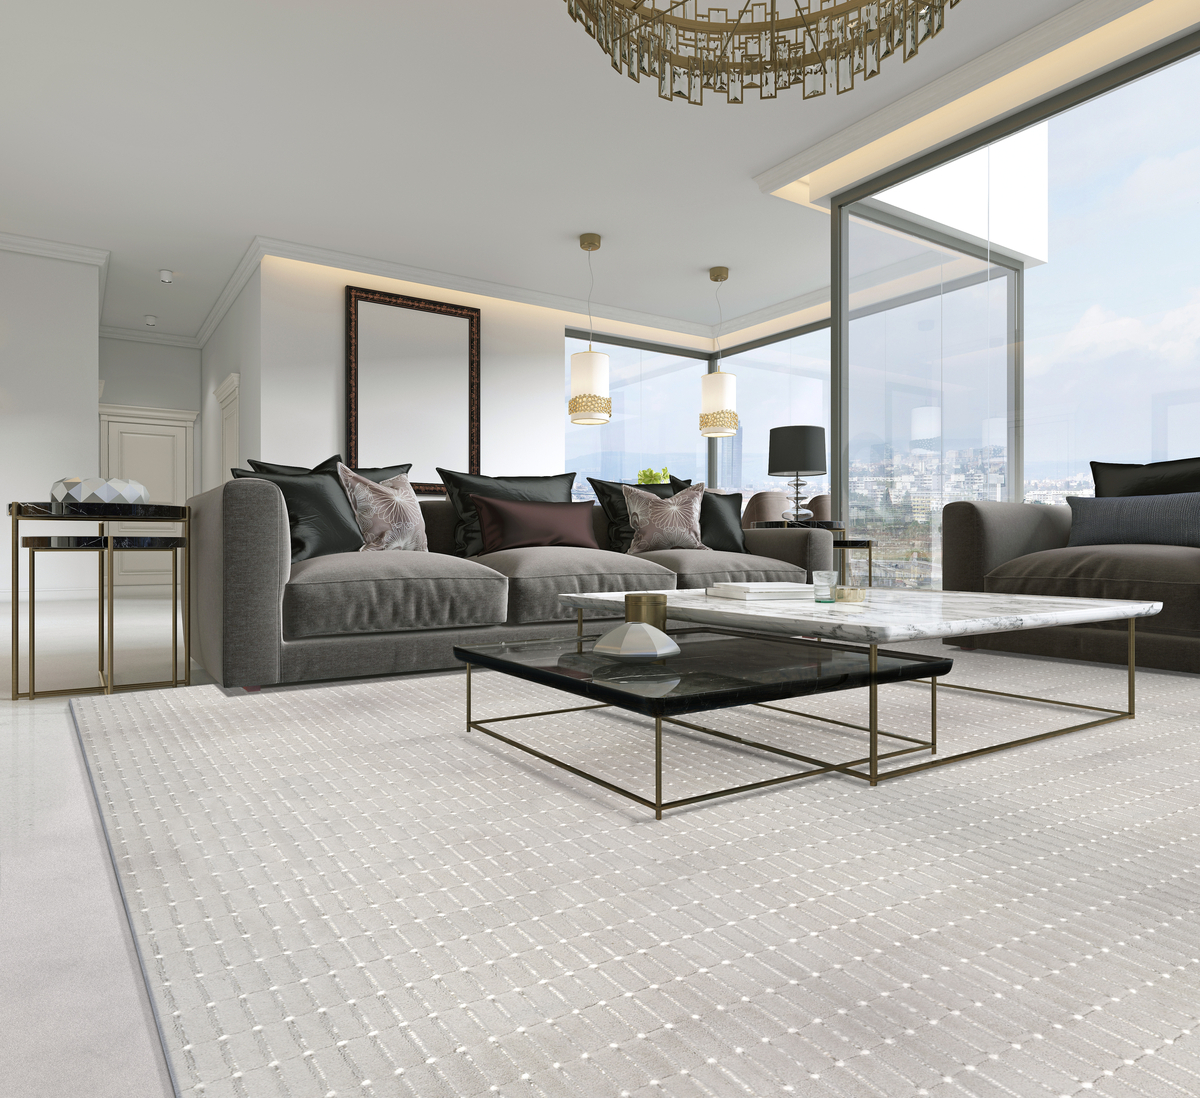 Modern luxury living room interior with a sofa, armchairs, a cof